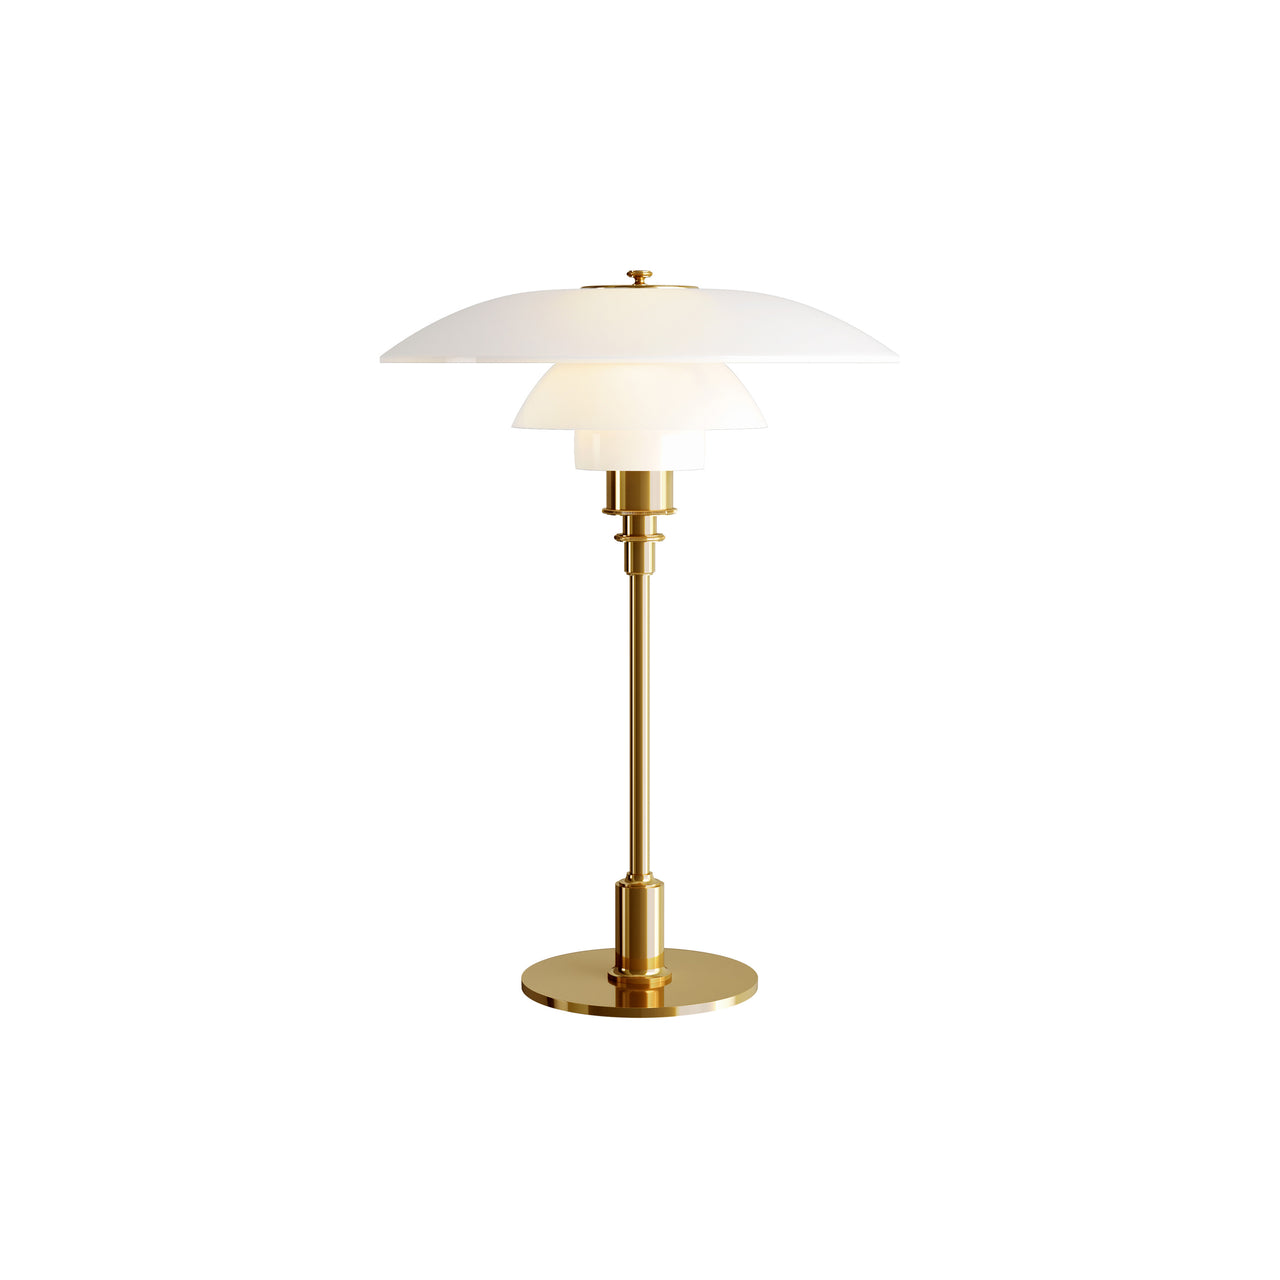 PH 3½-2½ Glass Table Lamp: Metalized Brass